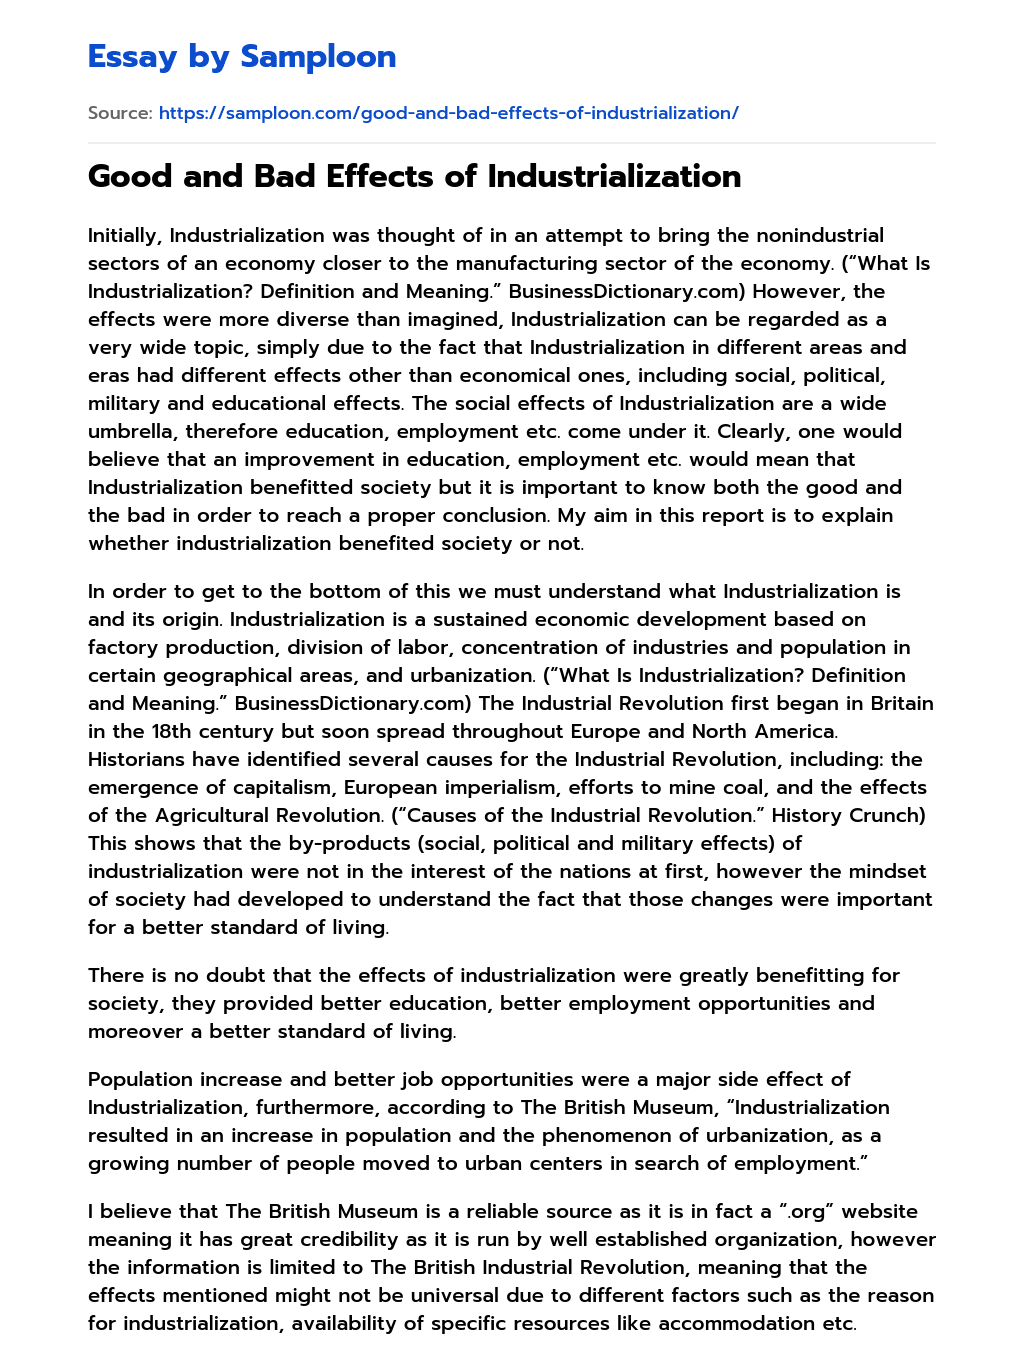 Good and Bad Effects of Industrialization essay